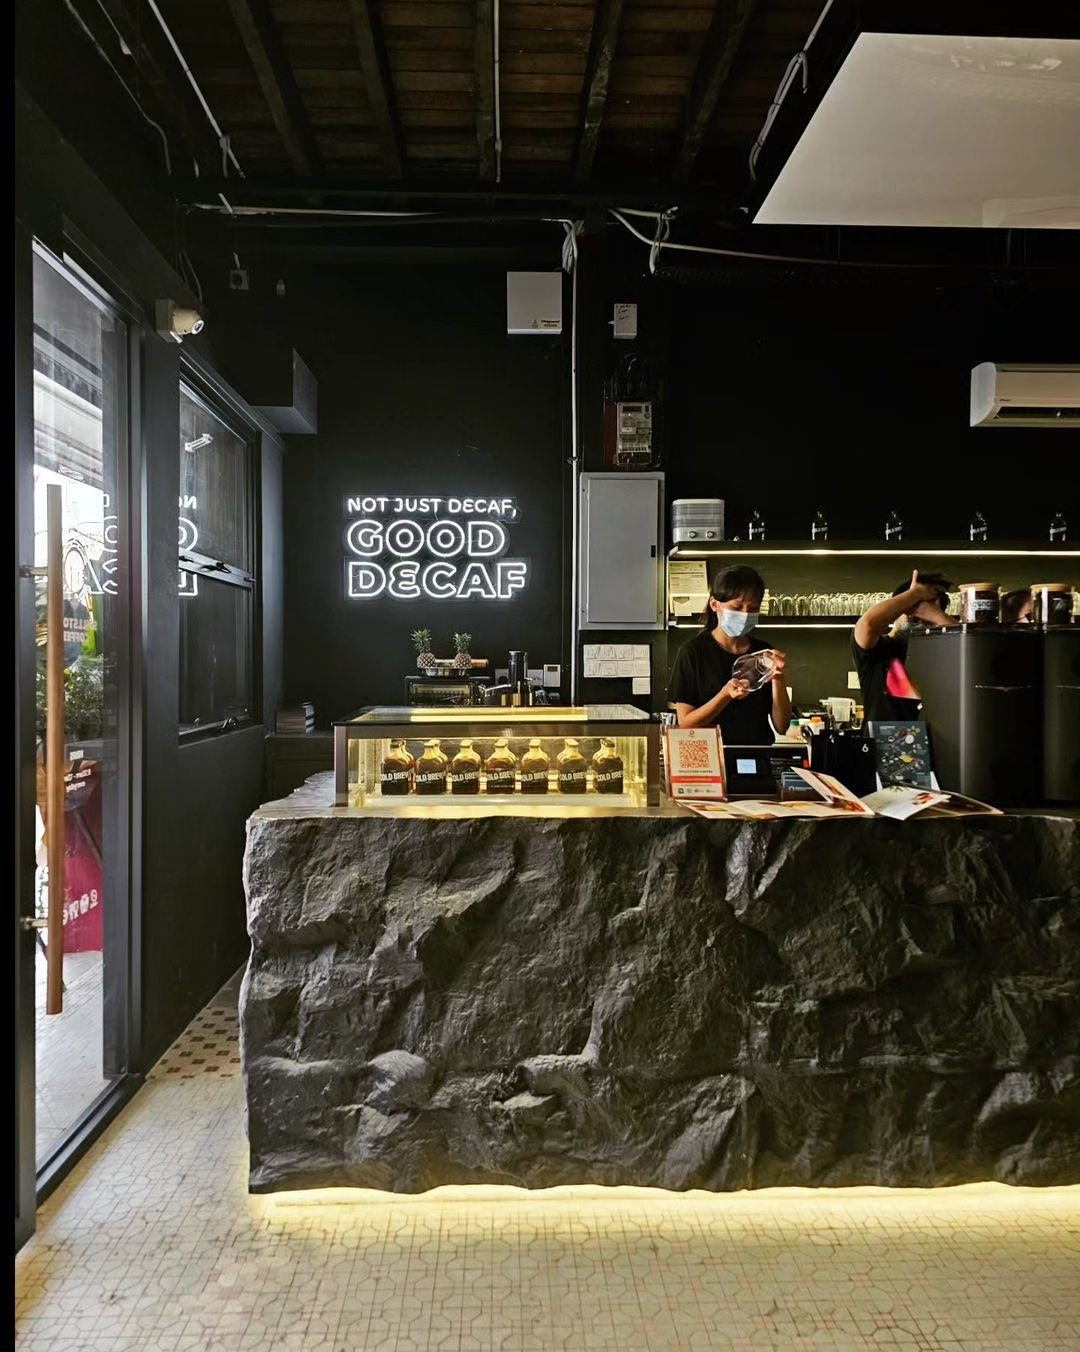 SPILLSTONE CAFE IN KL - COFFEE COUNTER